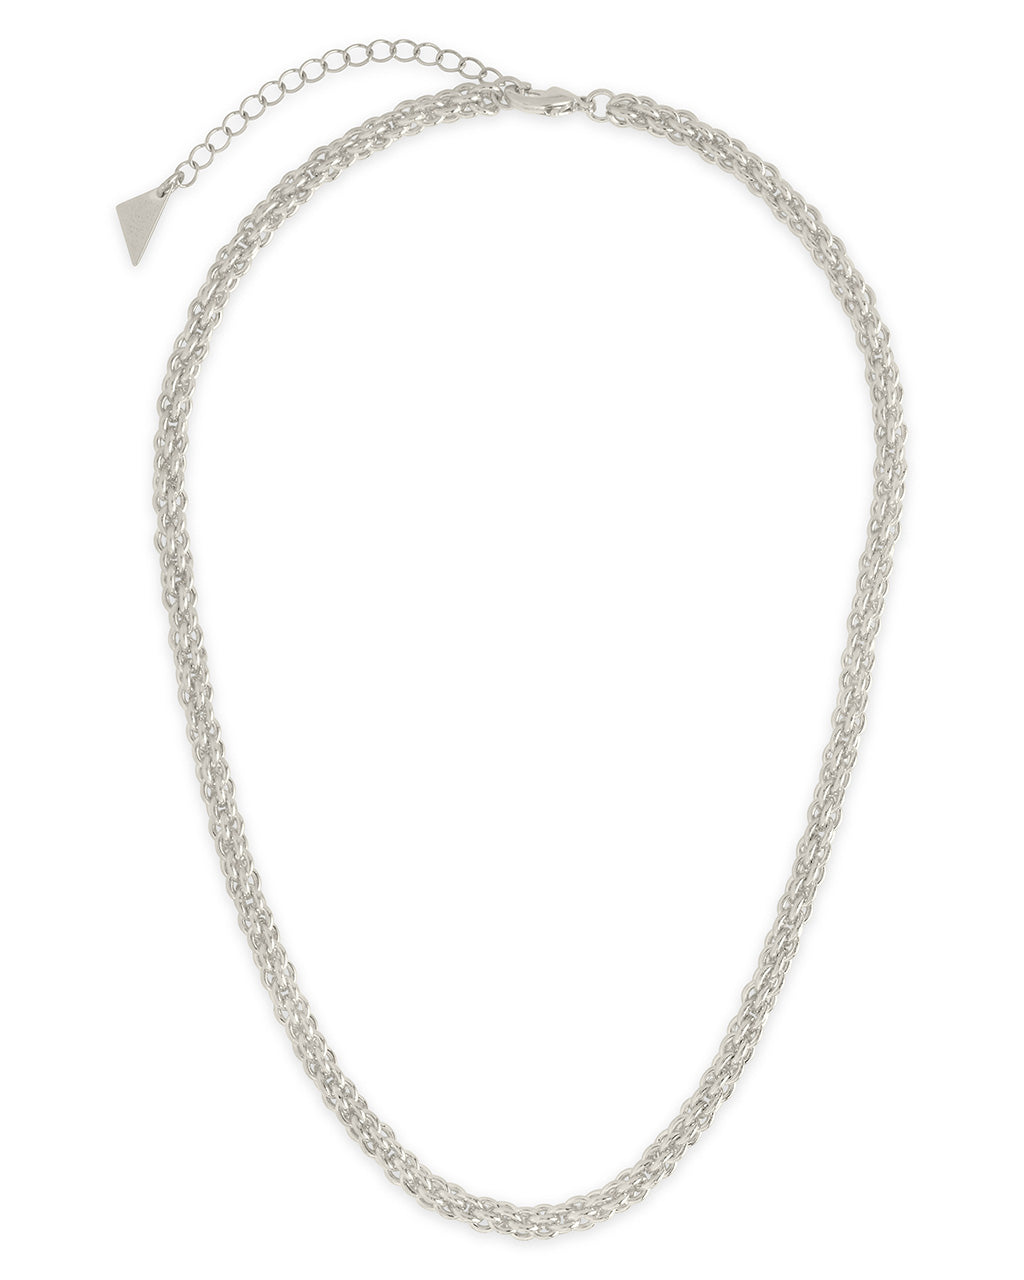 Yara Chain Necklace Sterling Forever Silver 